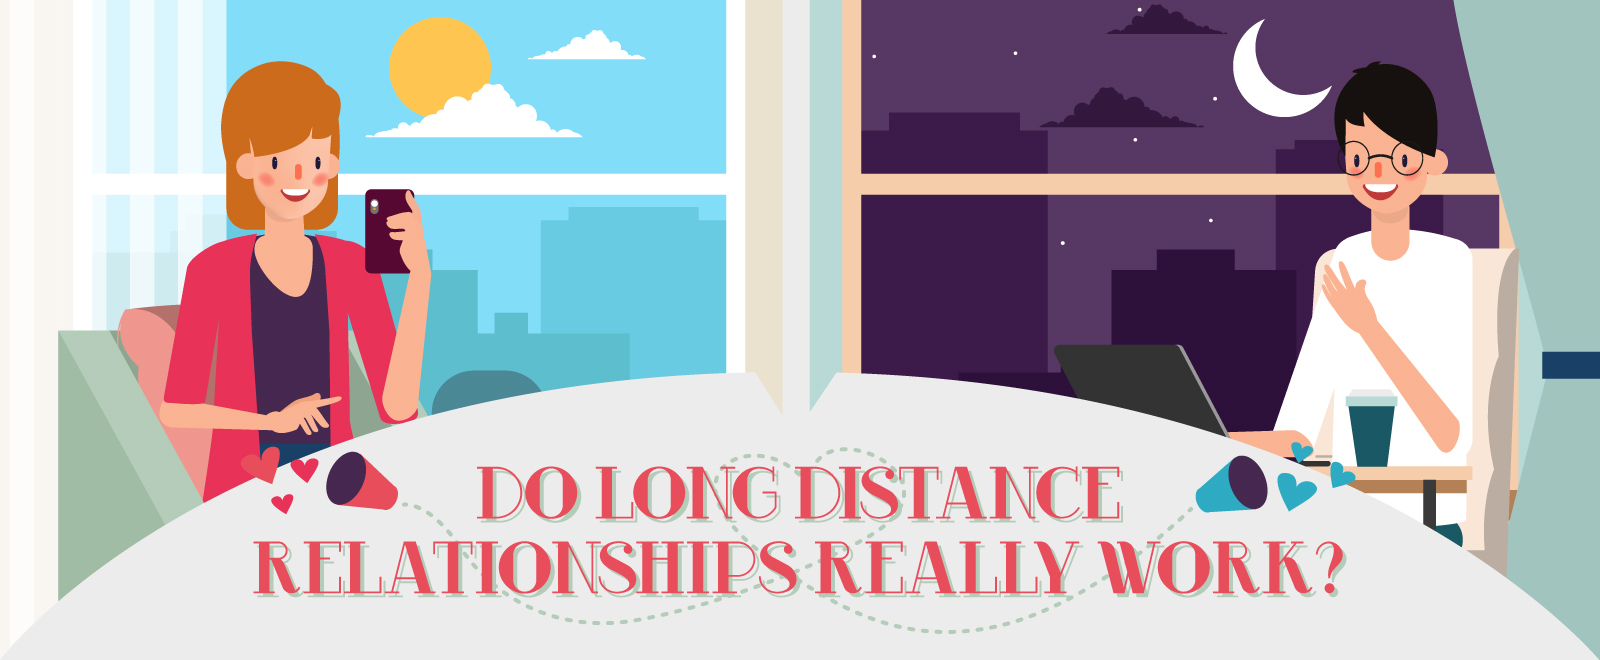 what is the effect of long distance on relationships.